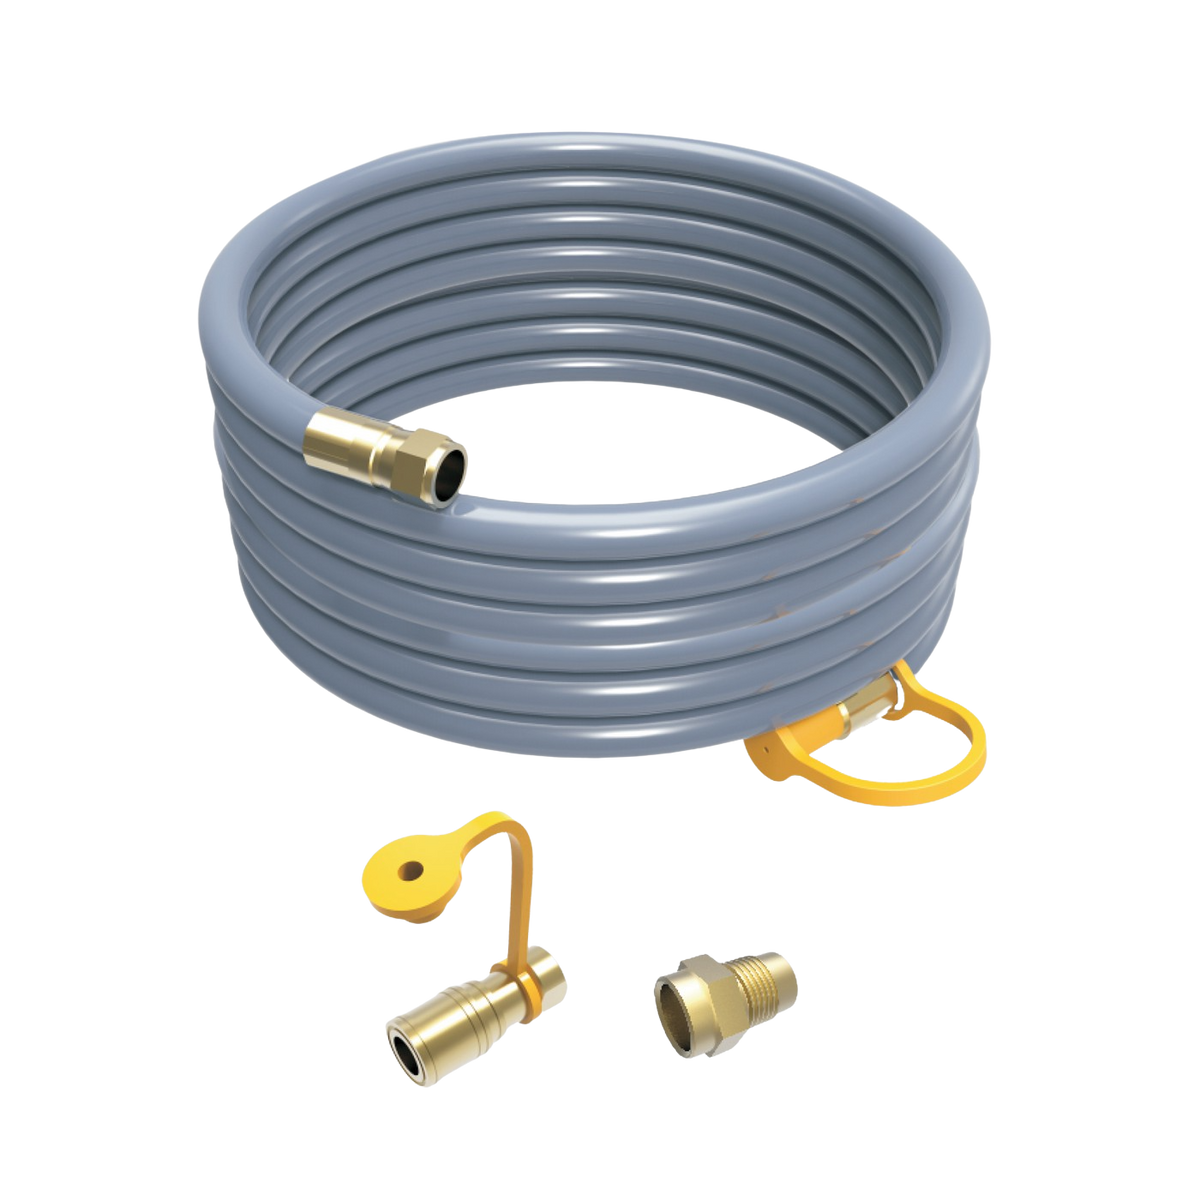 Firman 25' Natural Gas Hose With Storage Strap 1815 New